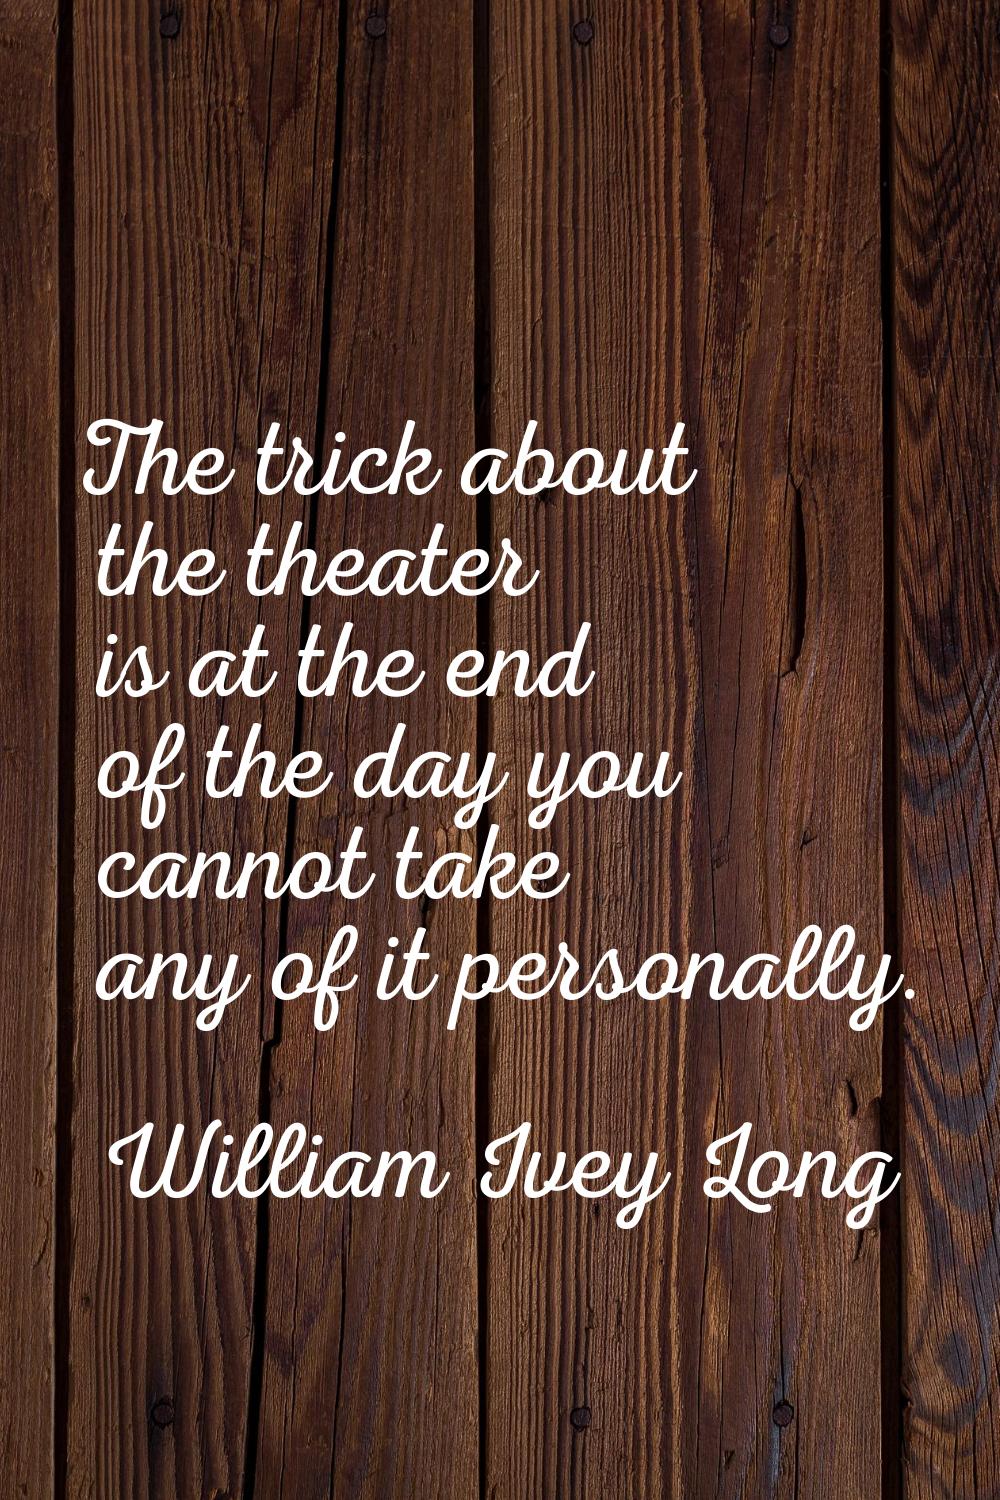 The trick about the theater is at the end of the day you cannot take any of it personally.